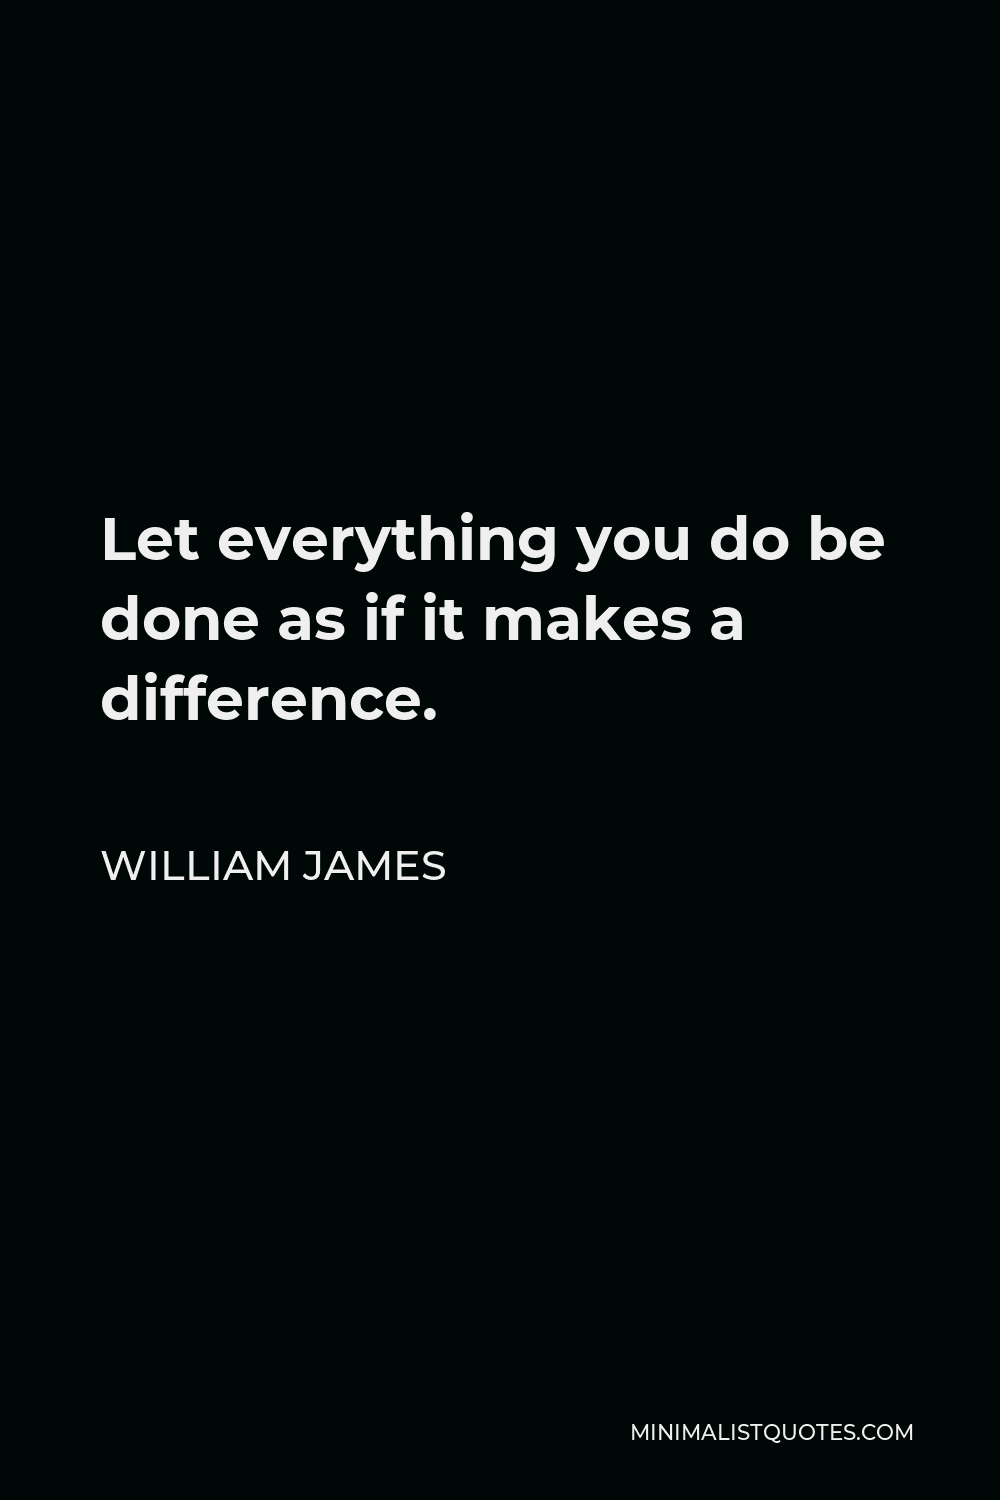 William James Quote - Let everything you do be done as if it makes a difference.